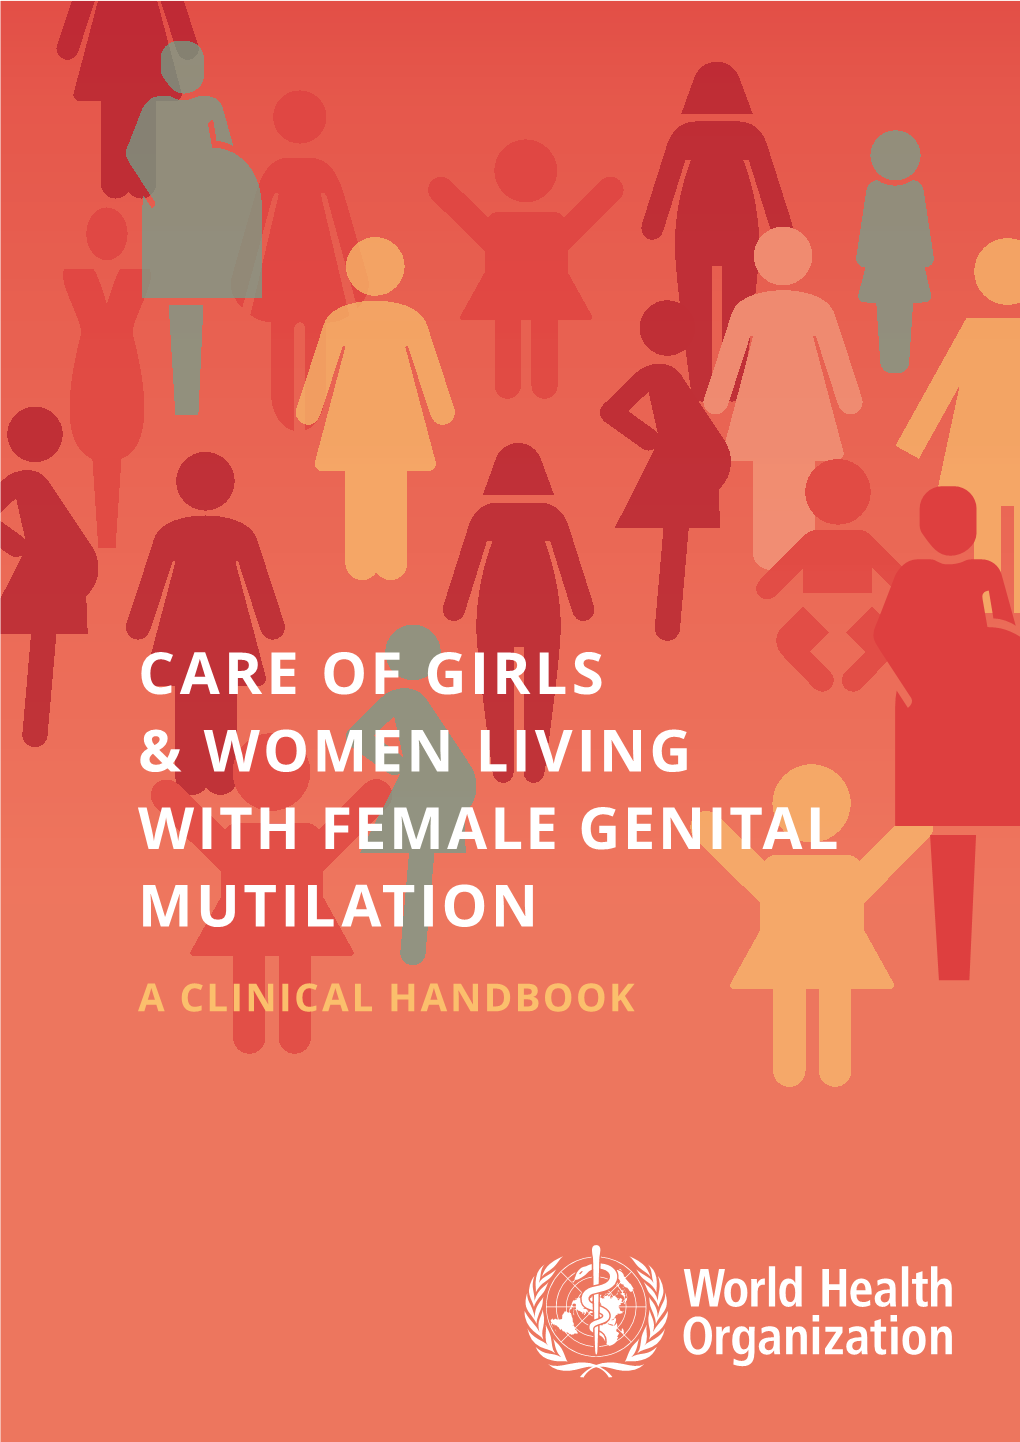 Care of Girls & Women Living with Female Genital Mutilation: a Clinical